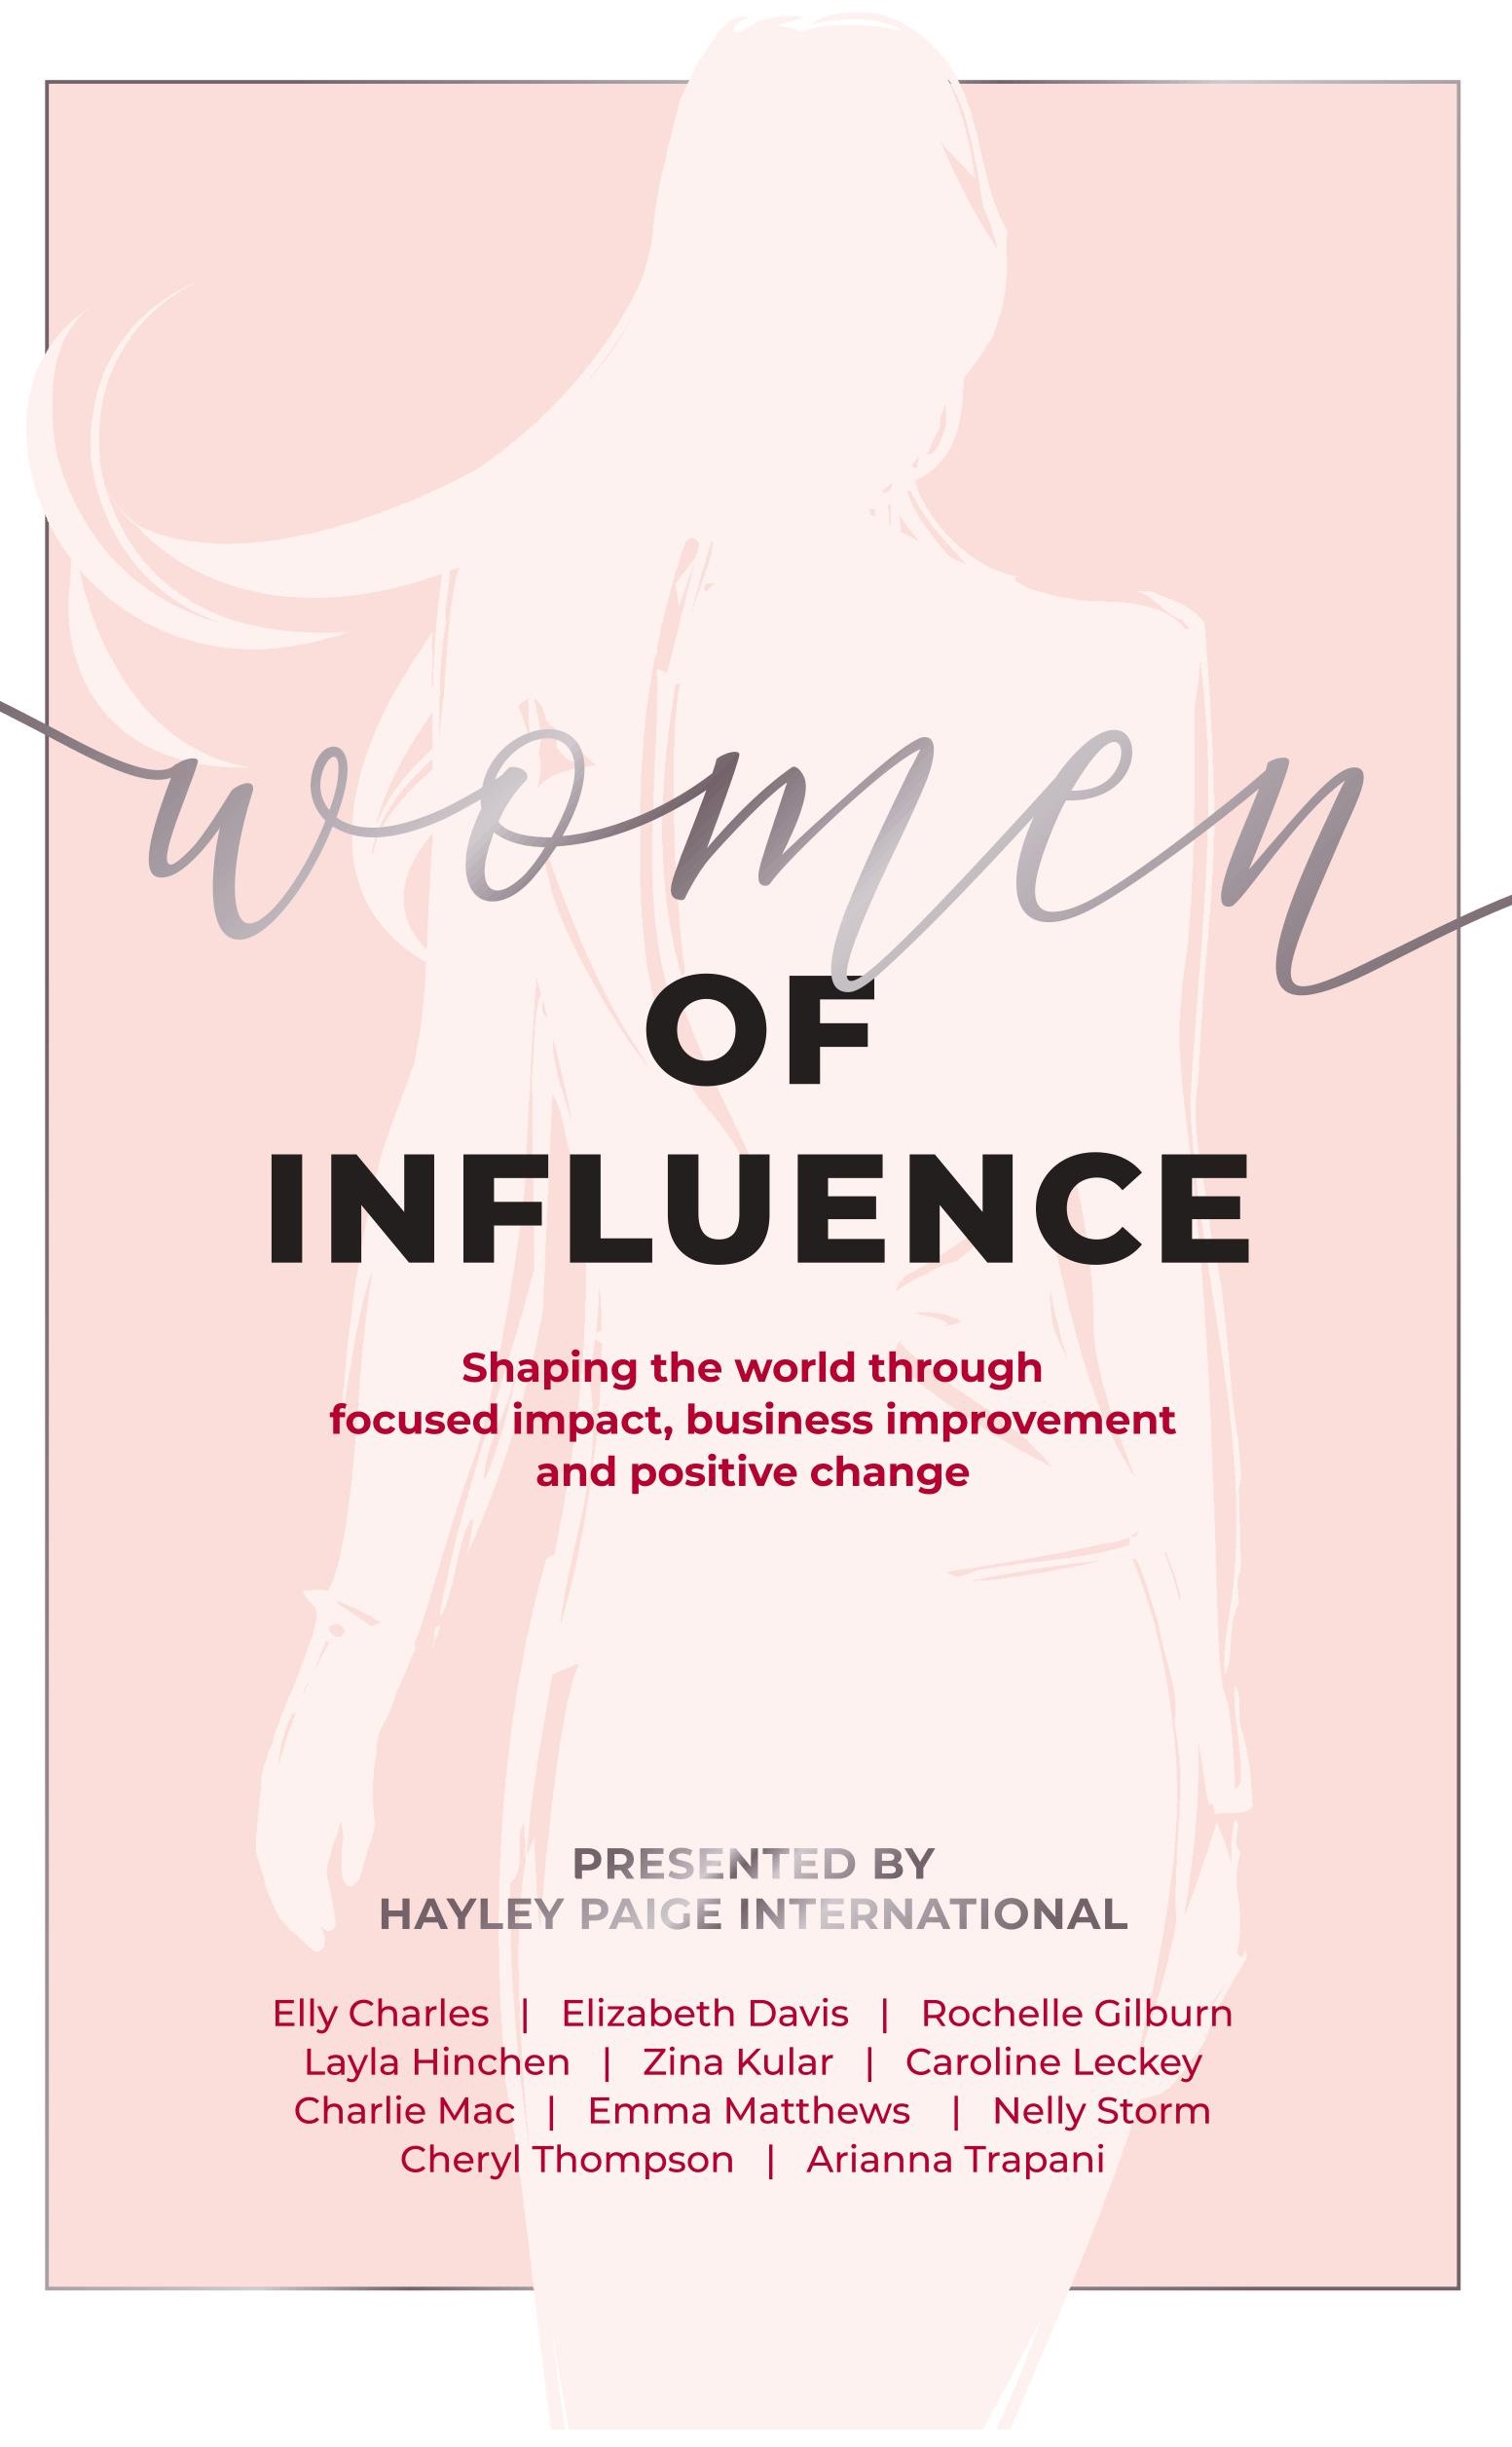 FREE: Women of Influence by Hayley Paige International